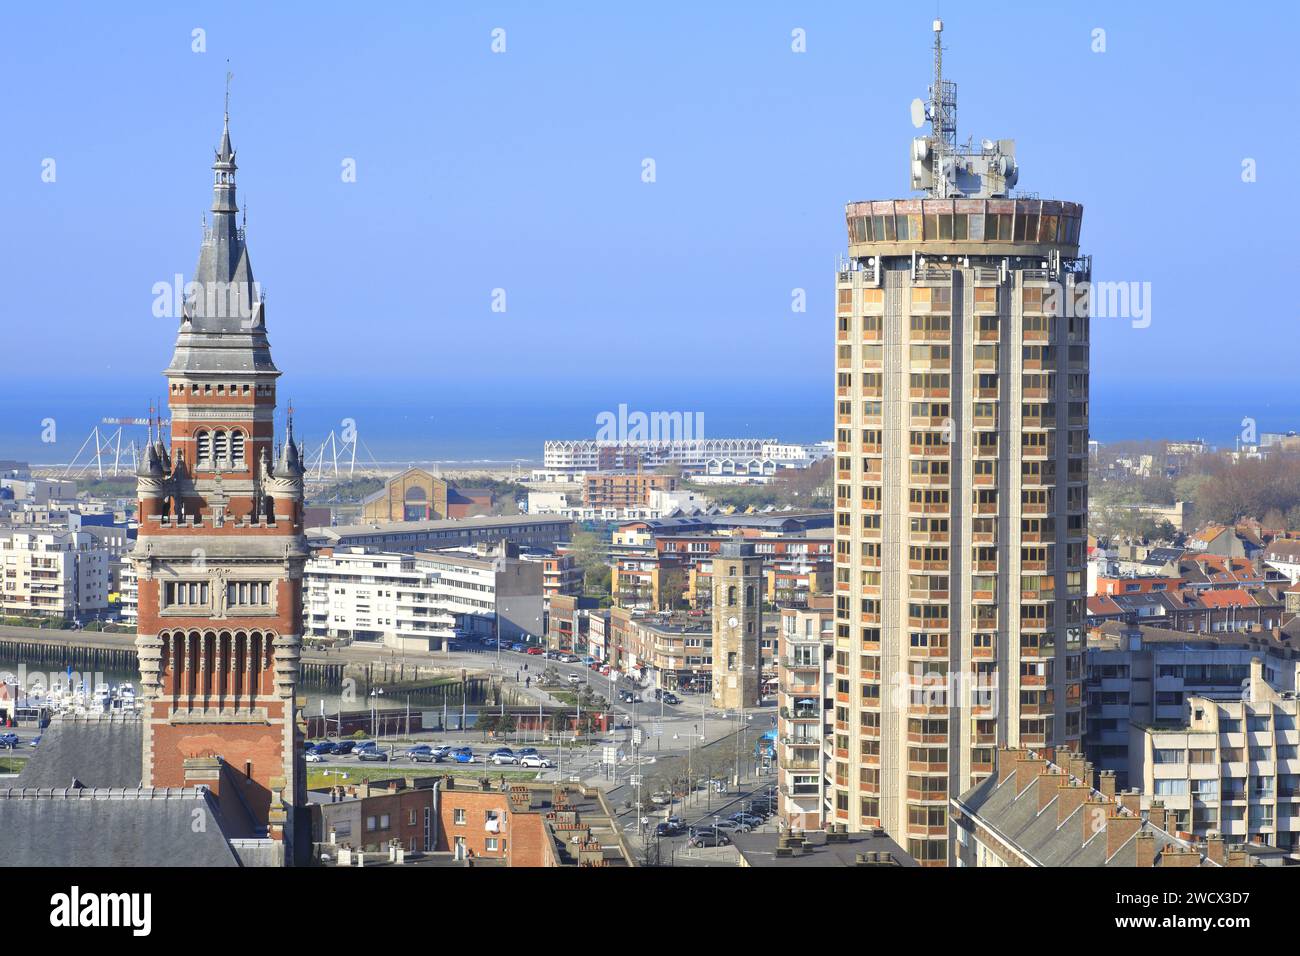 France, Nord, Dunkirk, view from the Belfry of Saint-Éloi on the Reuze Tower (1974) and the belfry of the Town Hall (listed as a UNESCO World Heritage Site) with the Sea of North Stock Photo